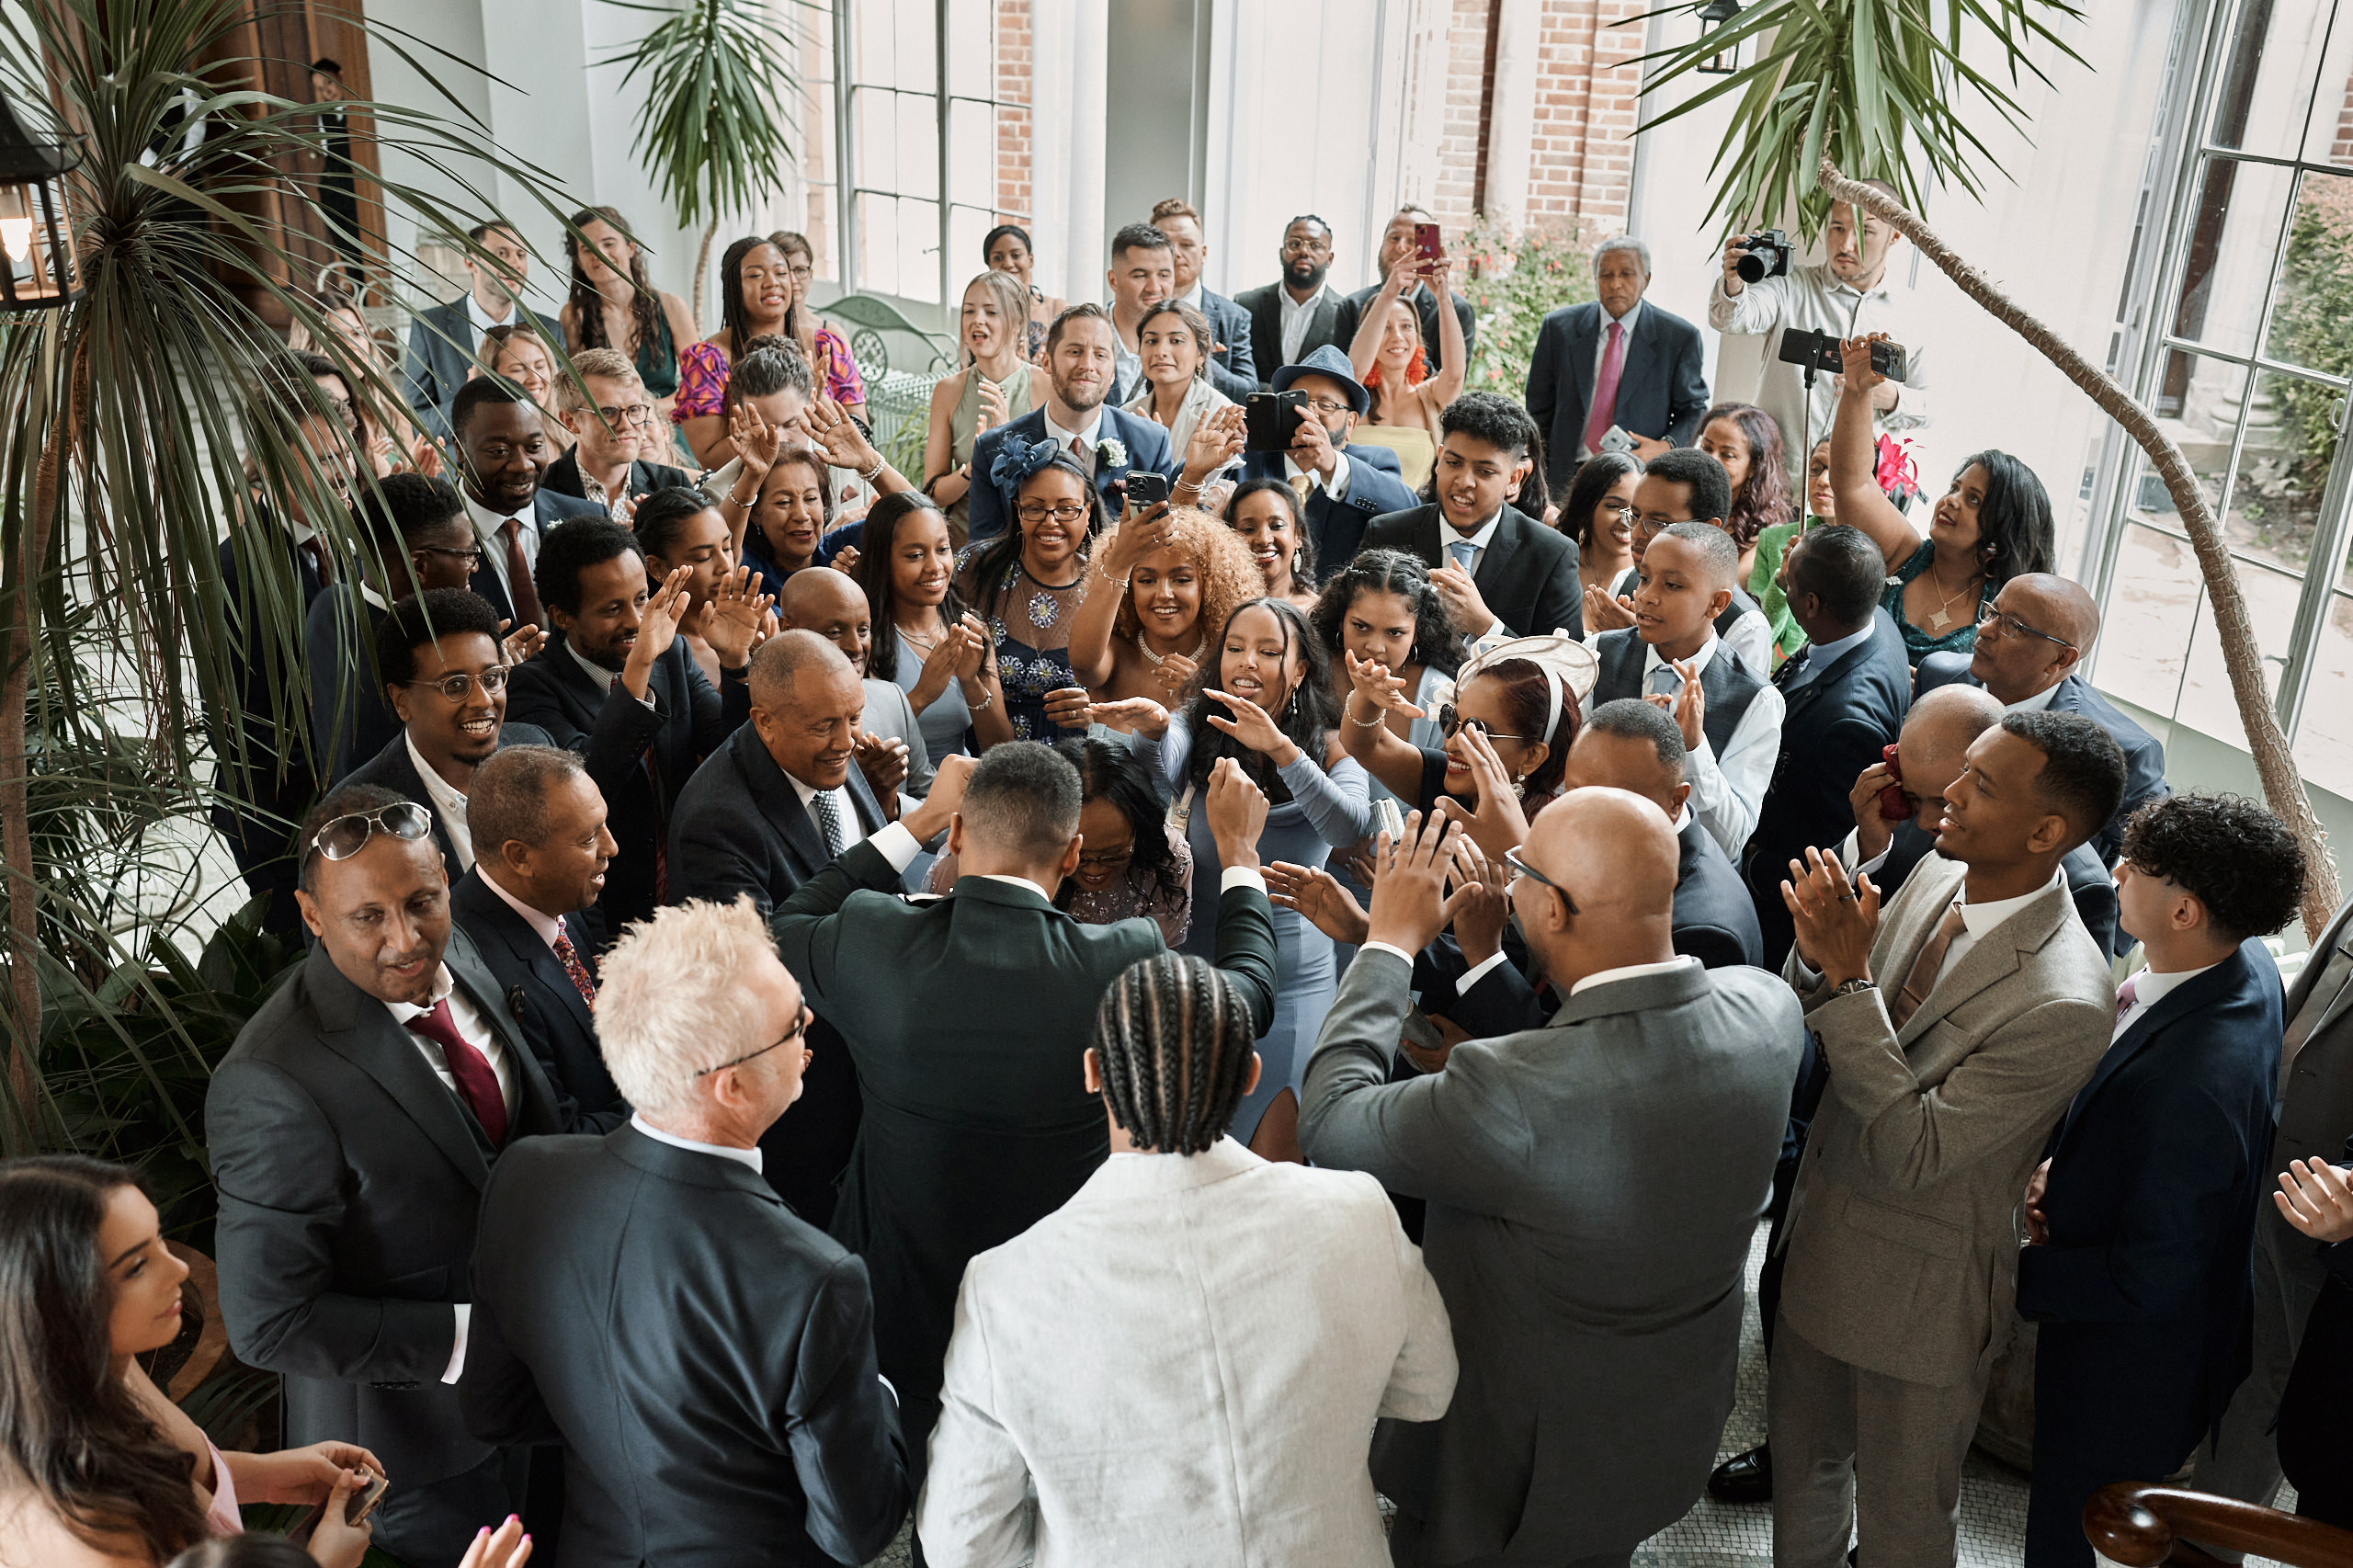 People clapping at a wedding party.